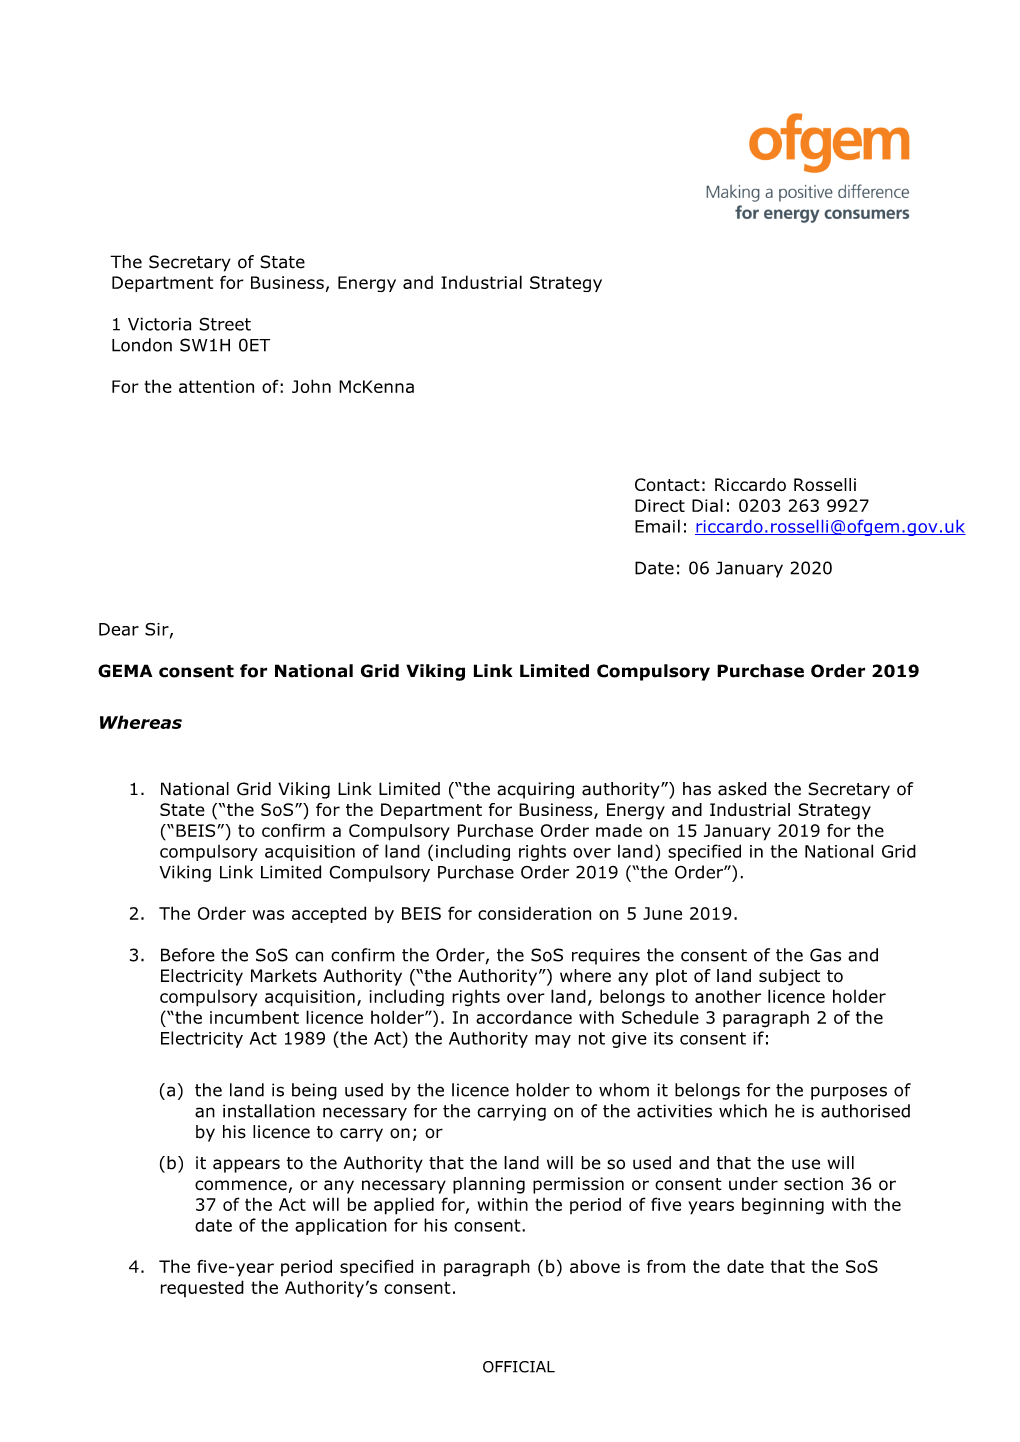 GEMA Consent for National Grid Viking Link Limited Compulsory Purchase Order 2019